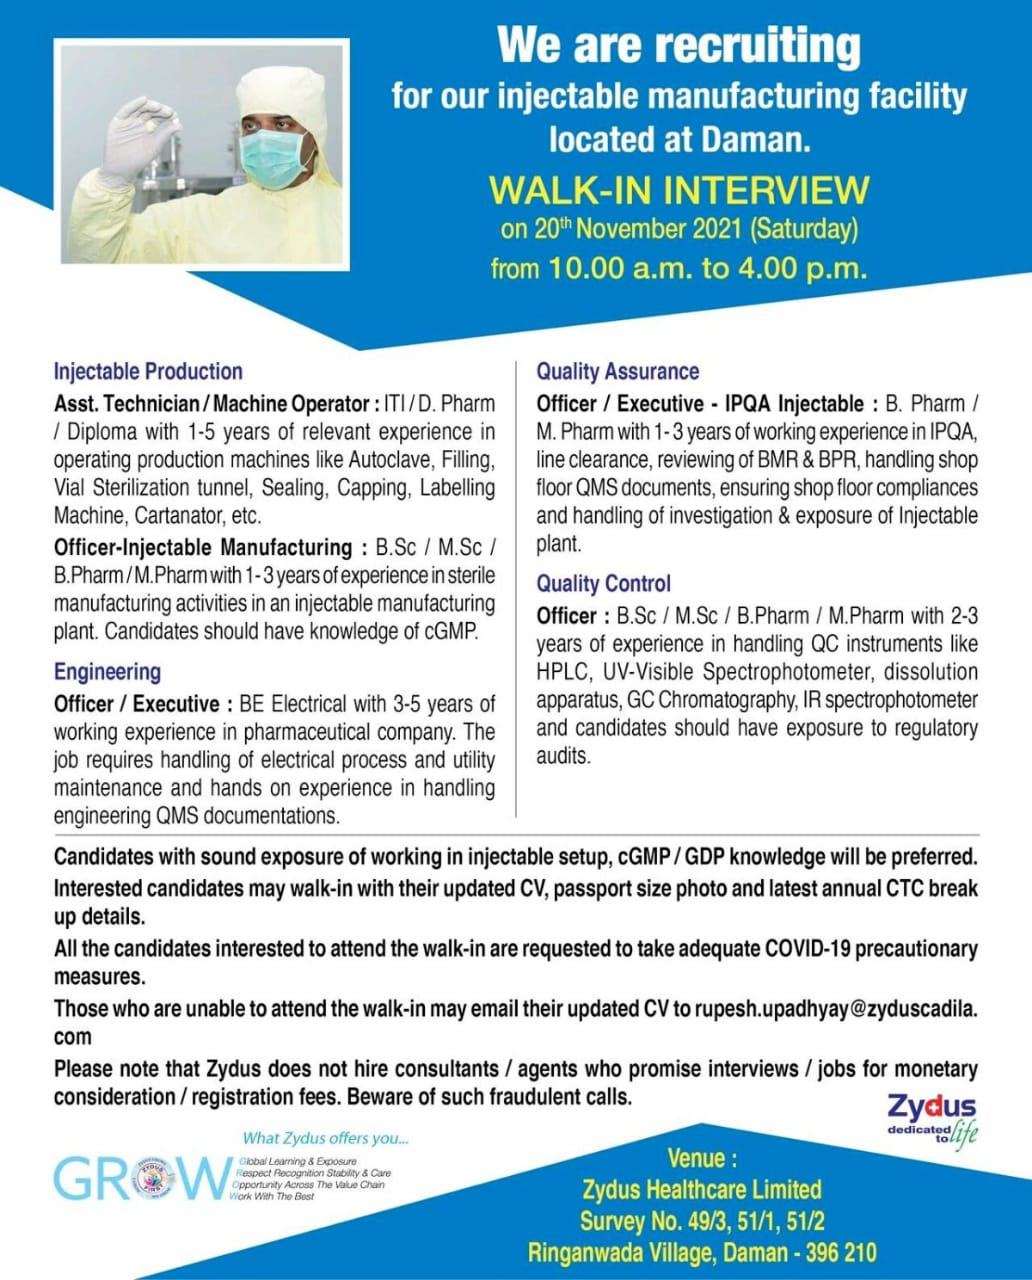 Job Availables,Zydus Walk-In-Interview For BSc/ MSc/ B.Pharm/ M.Pharm/ D.Pharm/ ITI/ Diploma/ BE Electrical